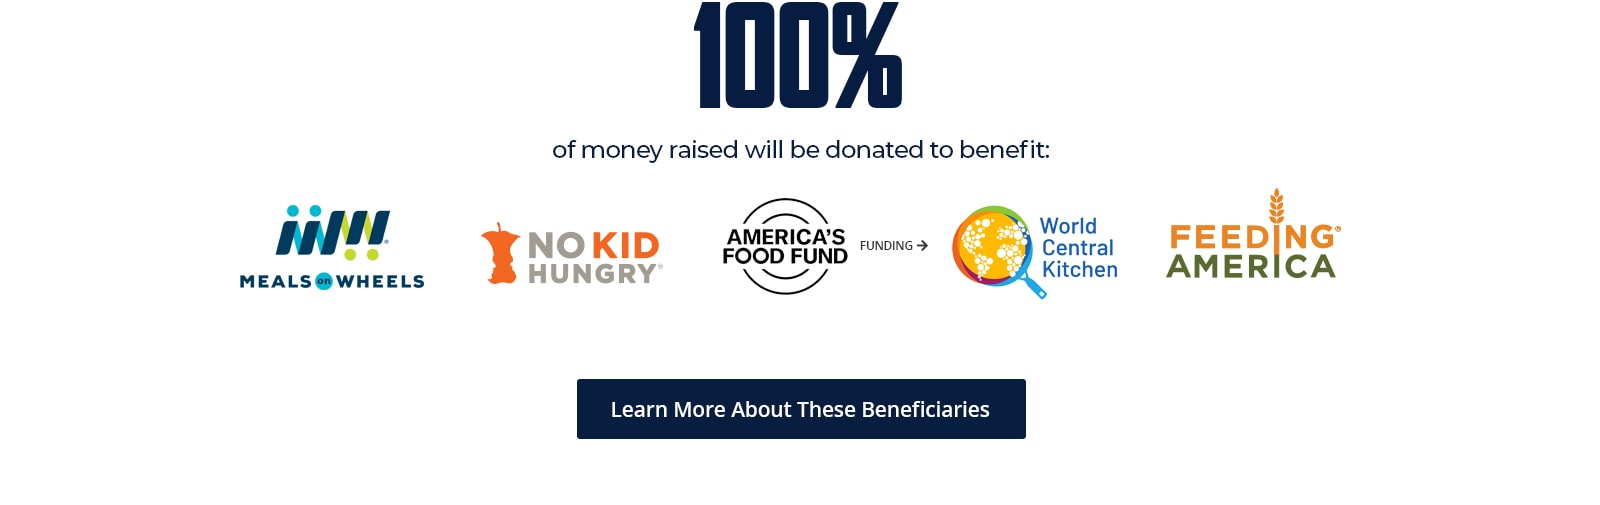 100% of money raised will be donated to benefit meals on wheels, no kid hungry, america's food fund, which fund world central kitchen and feeding america. Learn more about these beneficiaries